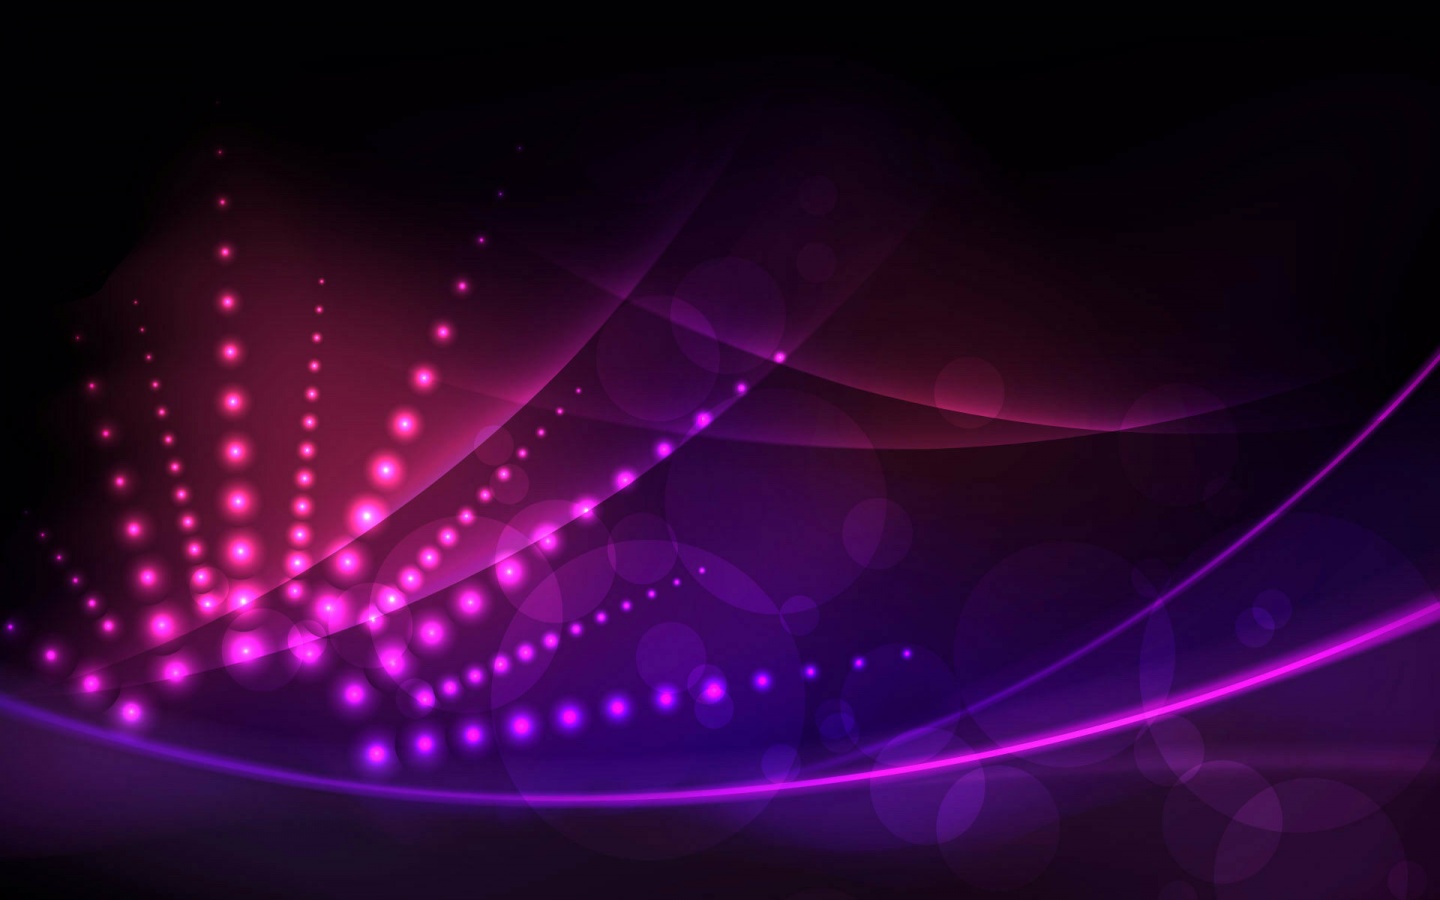 Abstract Violet Wallpapers - 1440x900 - 163509